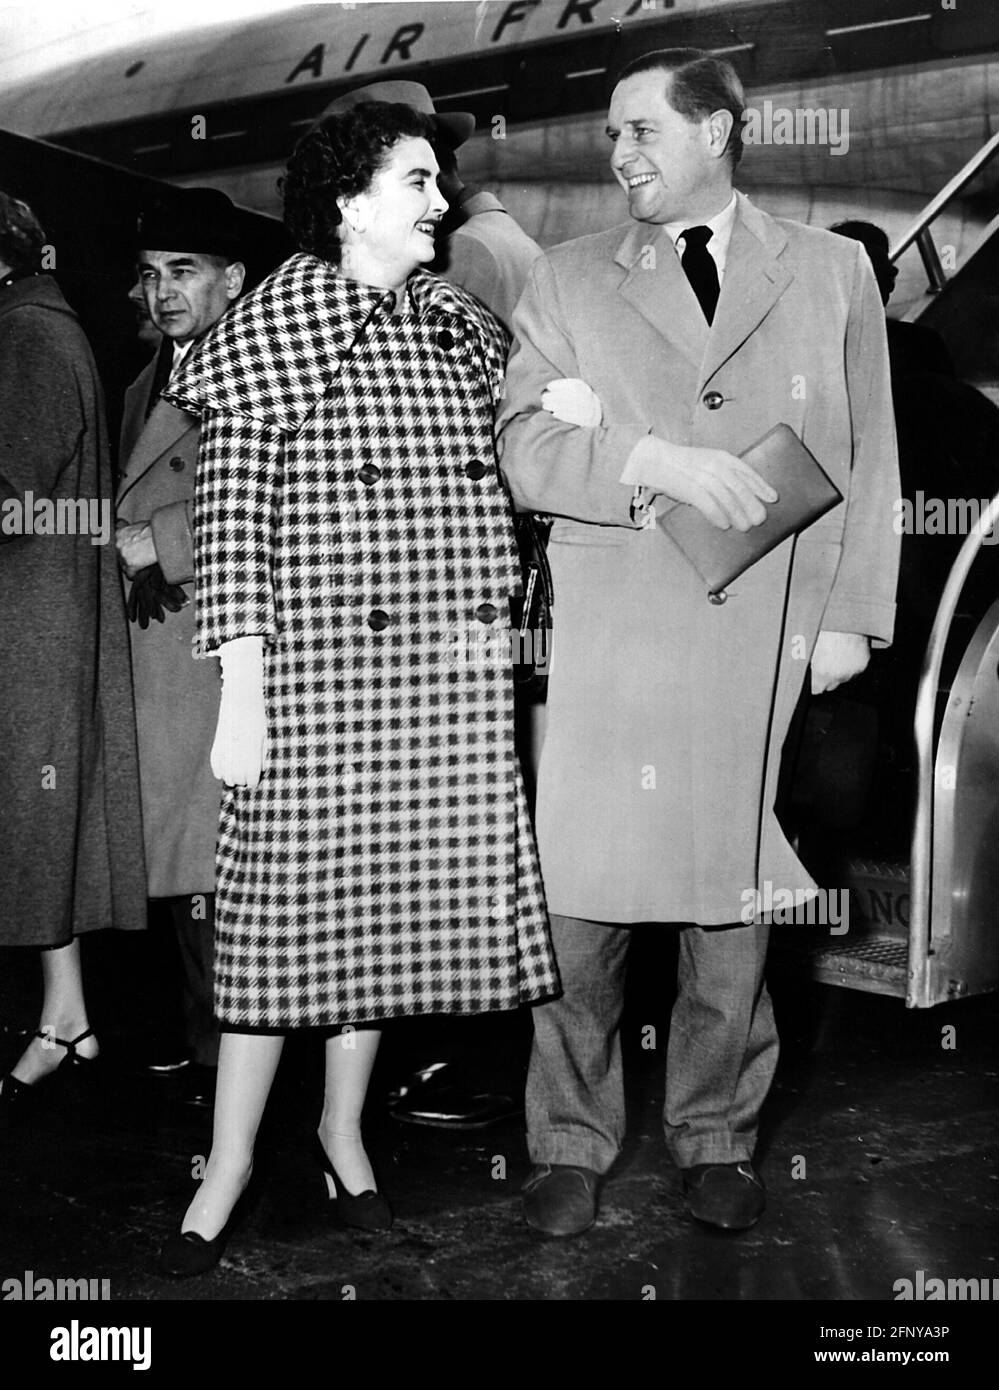 Hutton, Barbara, 14.11.1912 - 11.5.1979, Woolworth heiress, full length, ADDITIONAL-RIGHTS-CLEARANCE-INFO-NOT-AVAILABLE Stock Photo